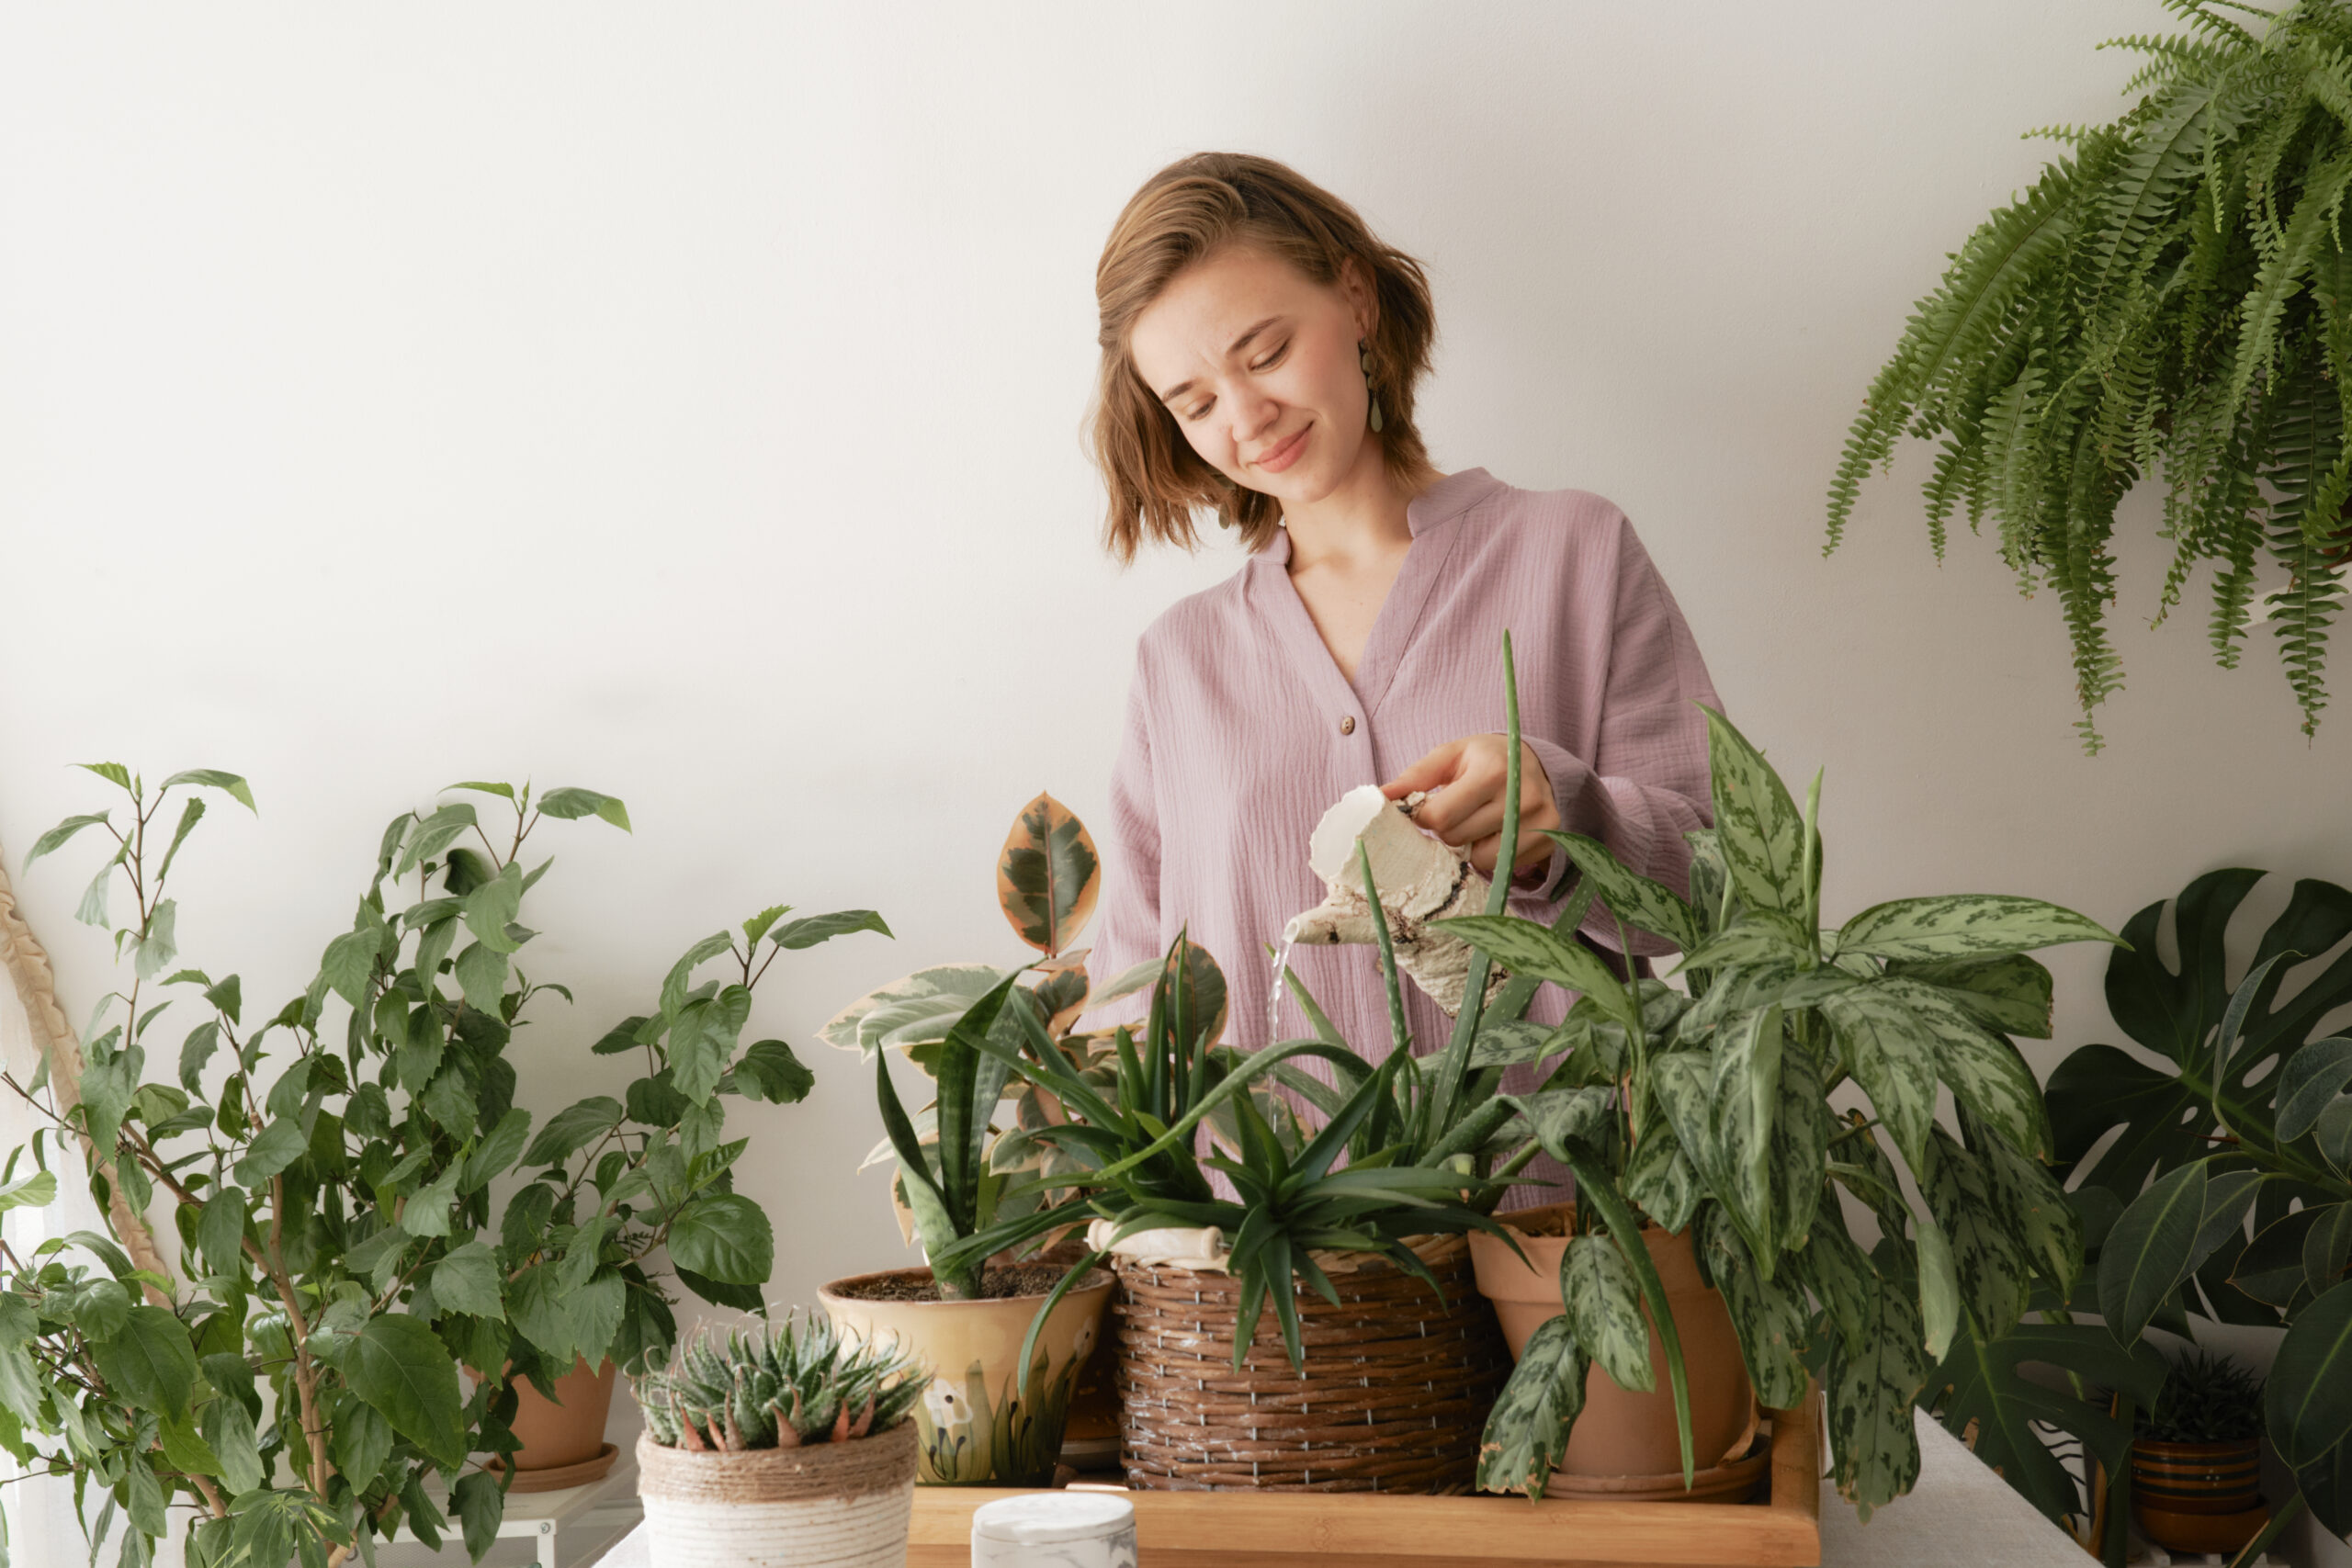 The Houseplant Boom Entices Younger Generations to Our Industry